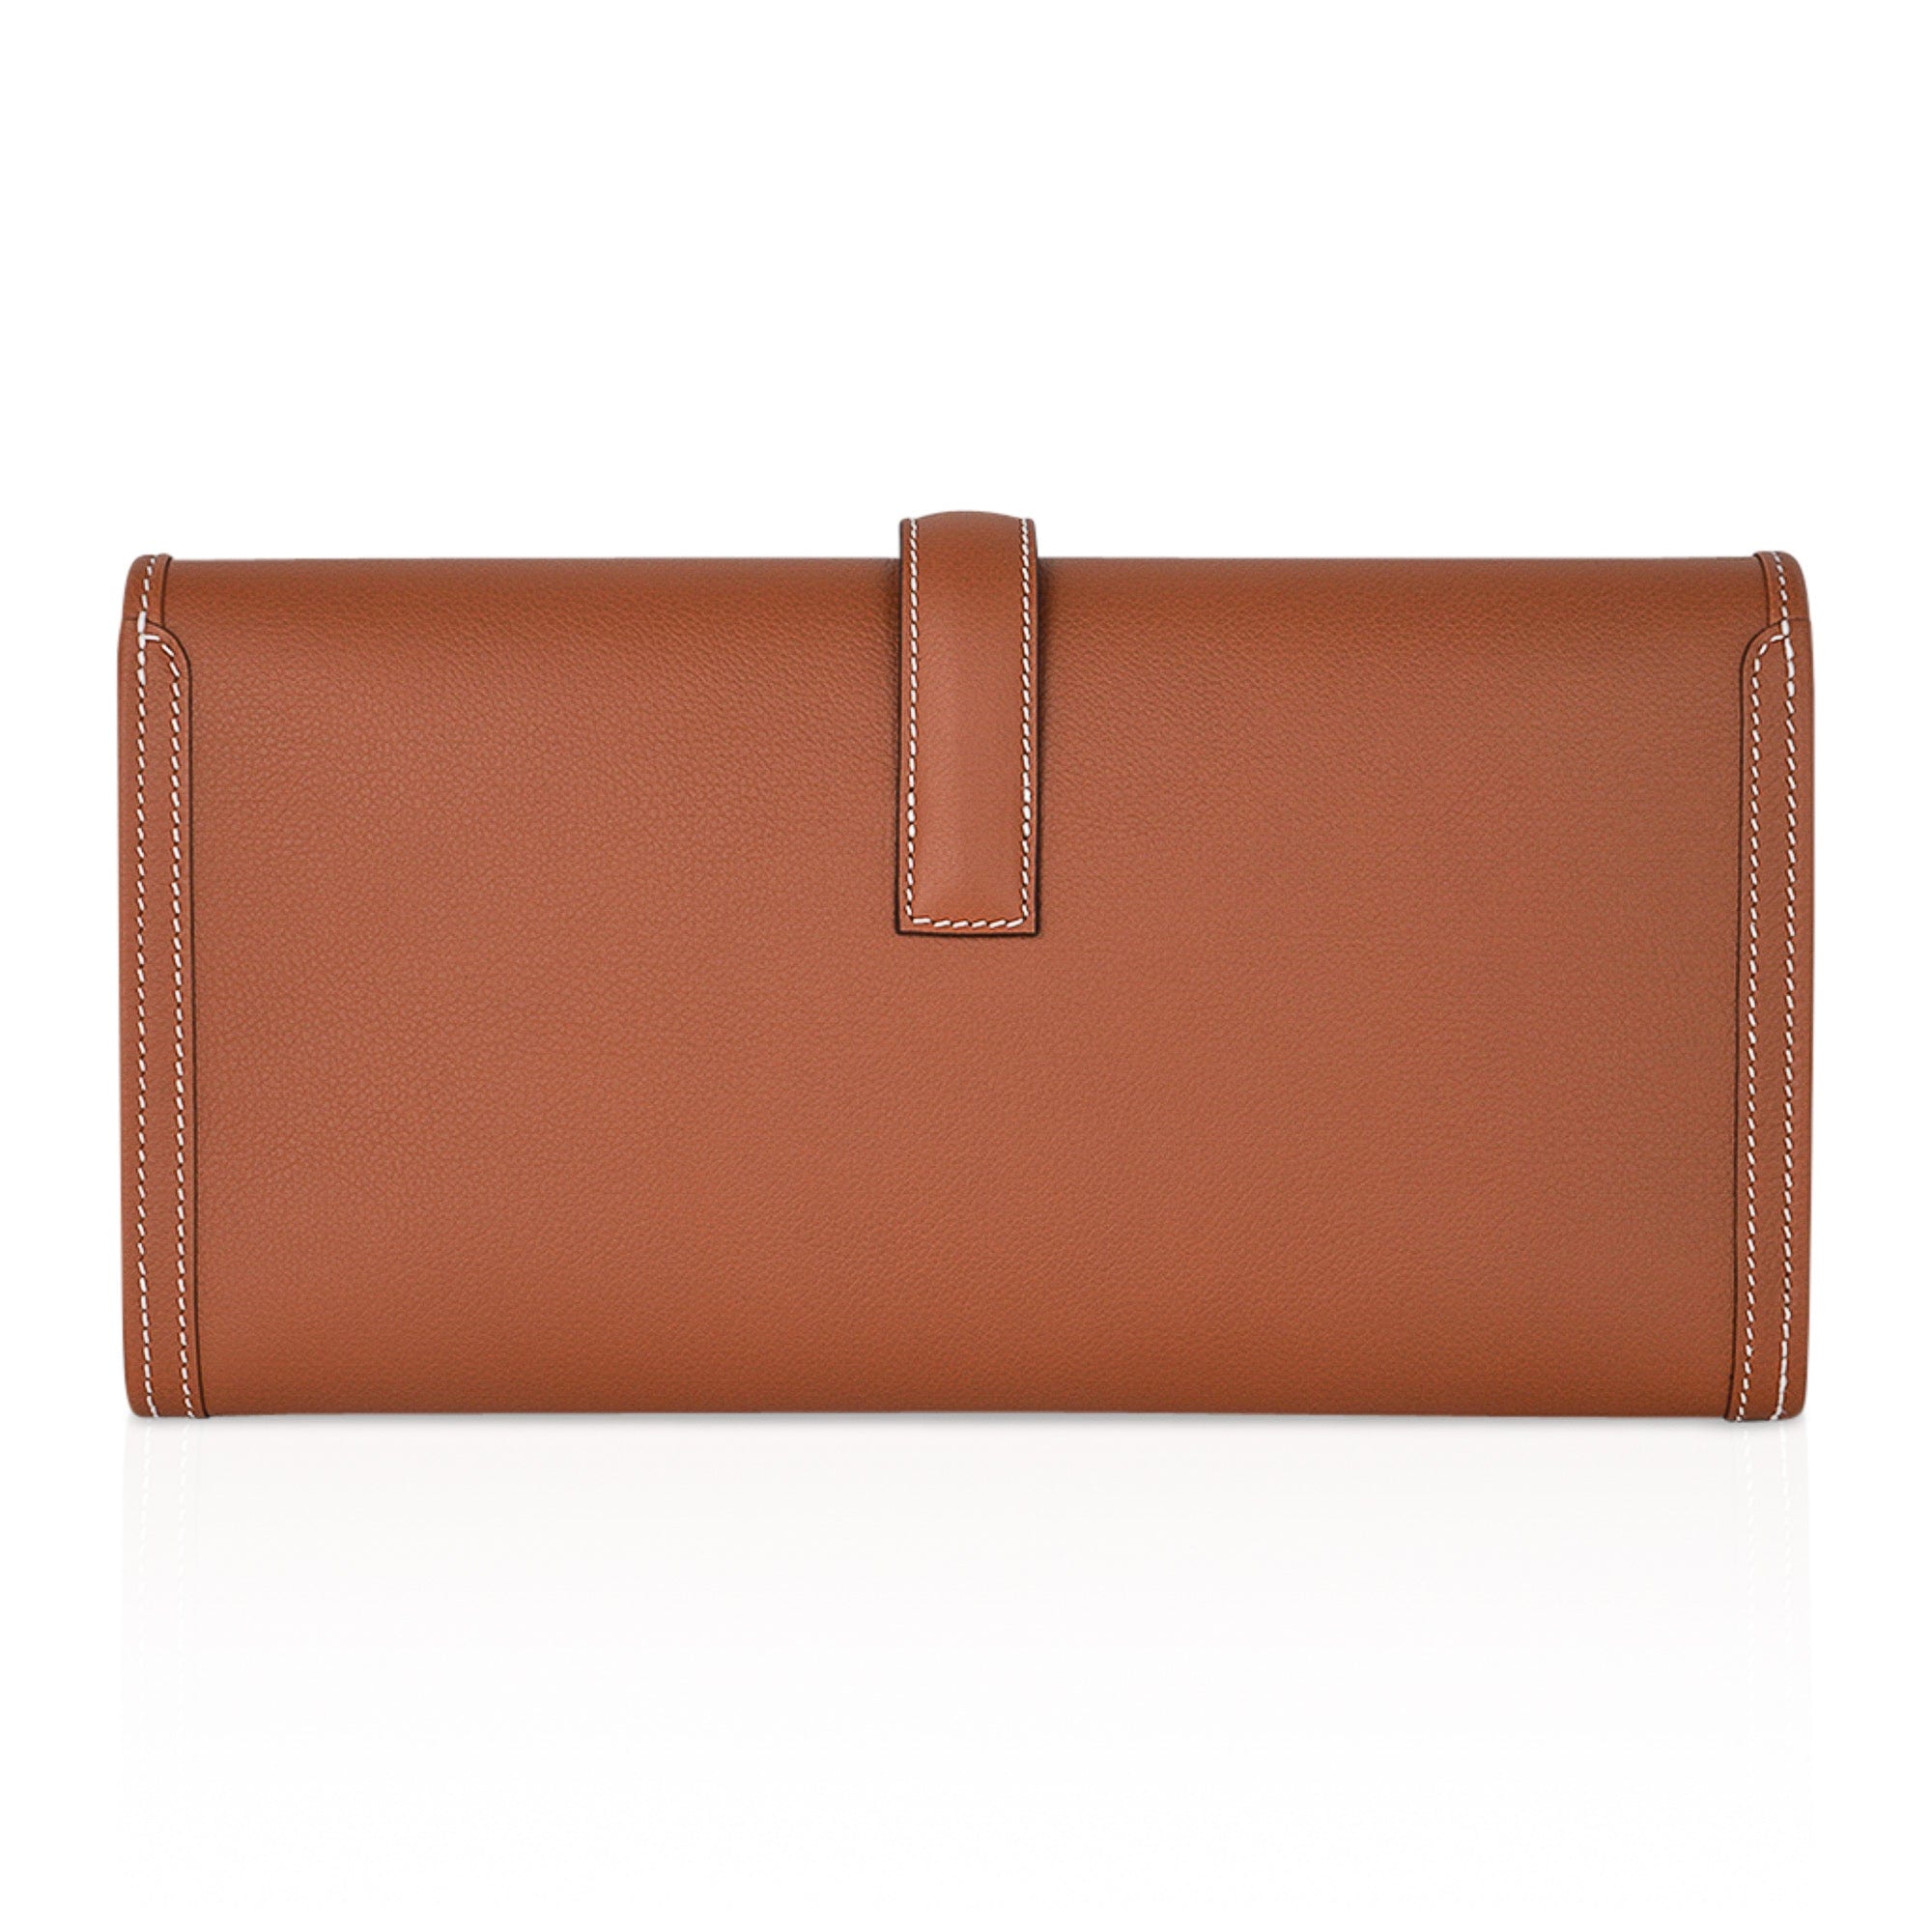 Hermes Jige Elan 29 Gold Clutch Bag Evercolor Leather • MIGHTYCHIC • 